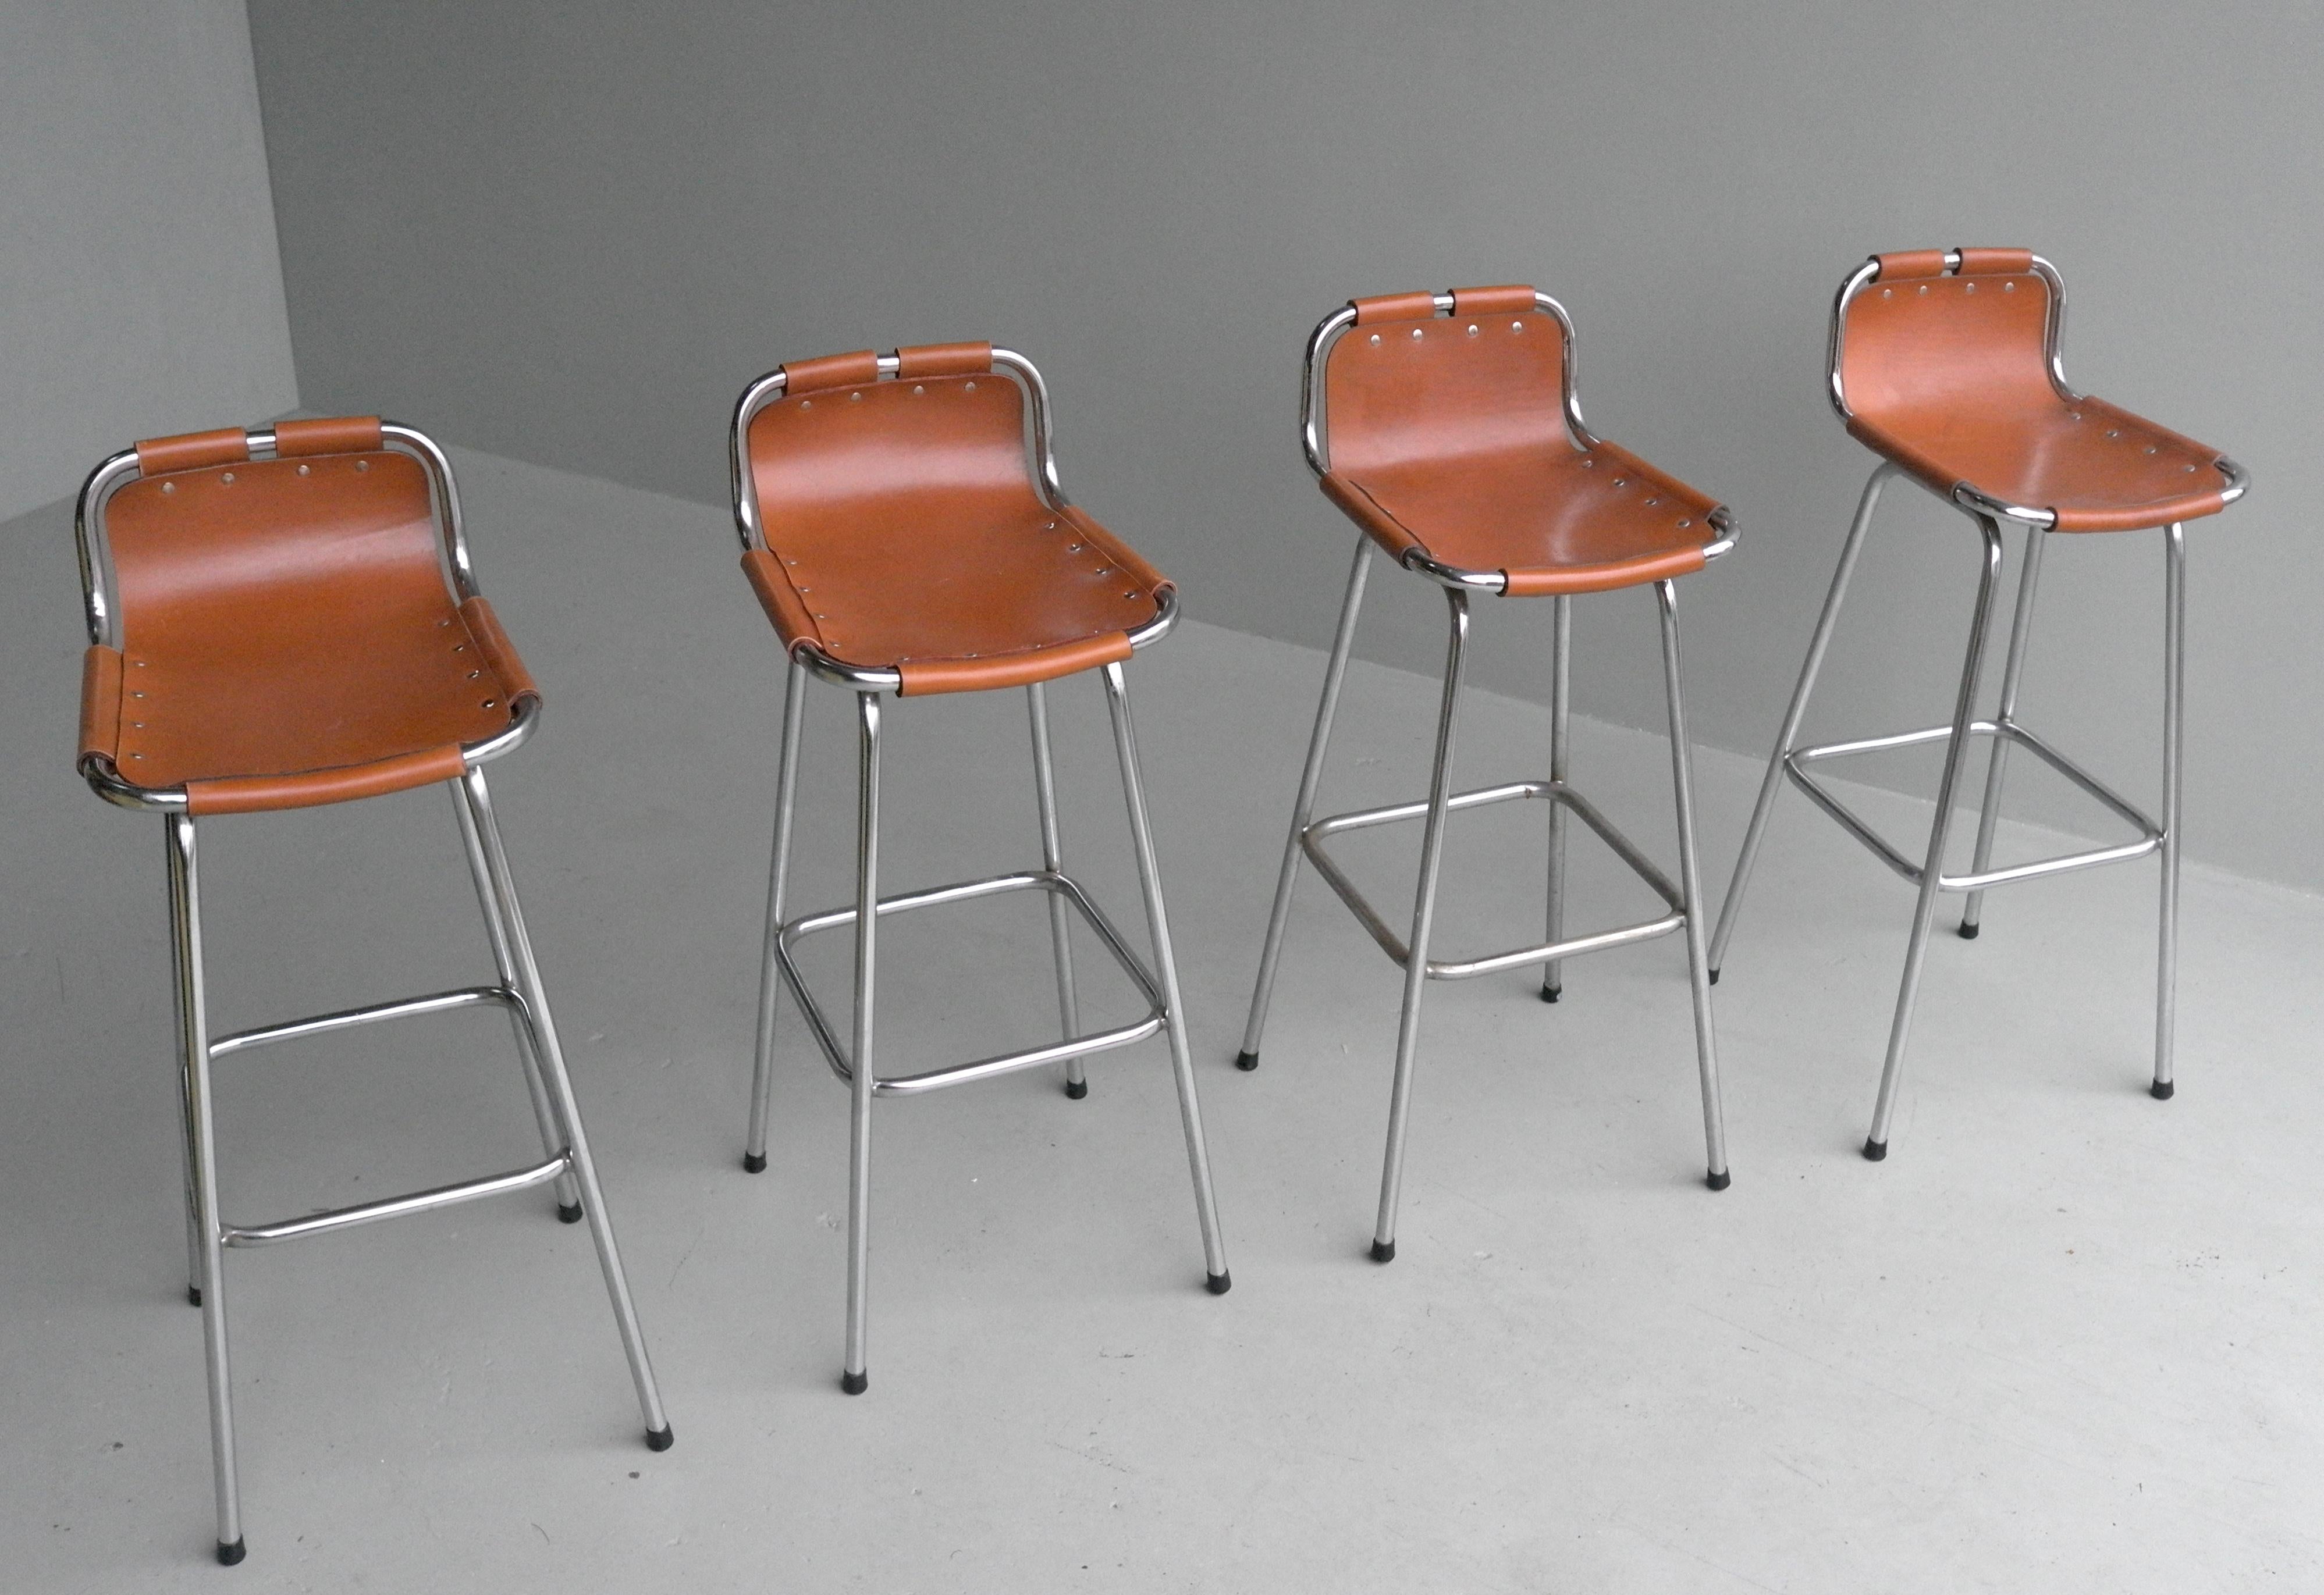 Leather barstools for Les Arc Ski Resort France, Selected by Charlotte Perriand

Charlotte Perriand was a French architect and designer. Her work aimed to create functional living spaces in the belief that better design helps in creating a better